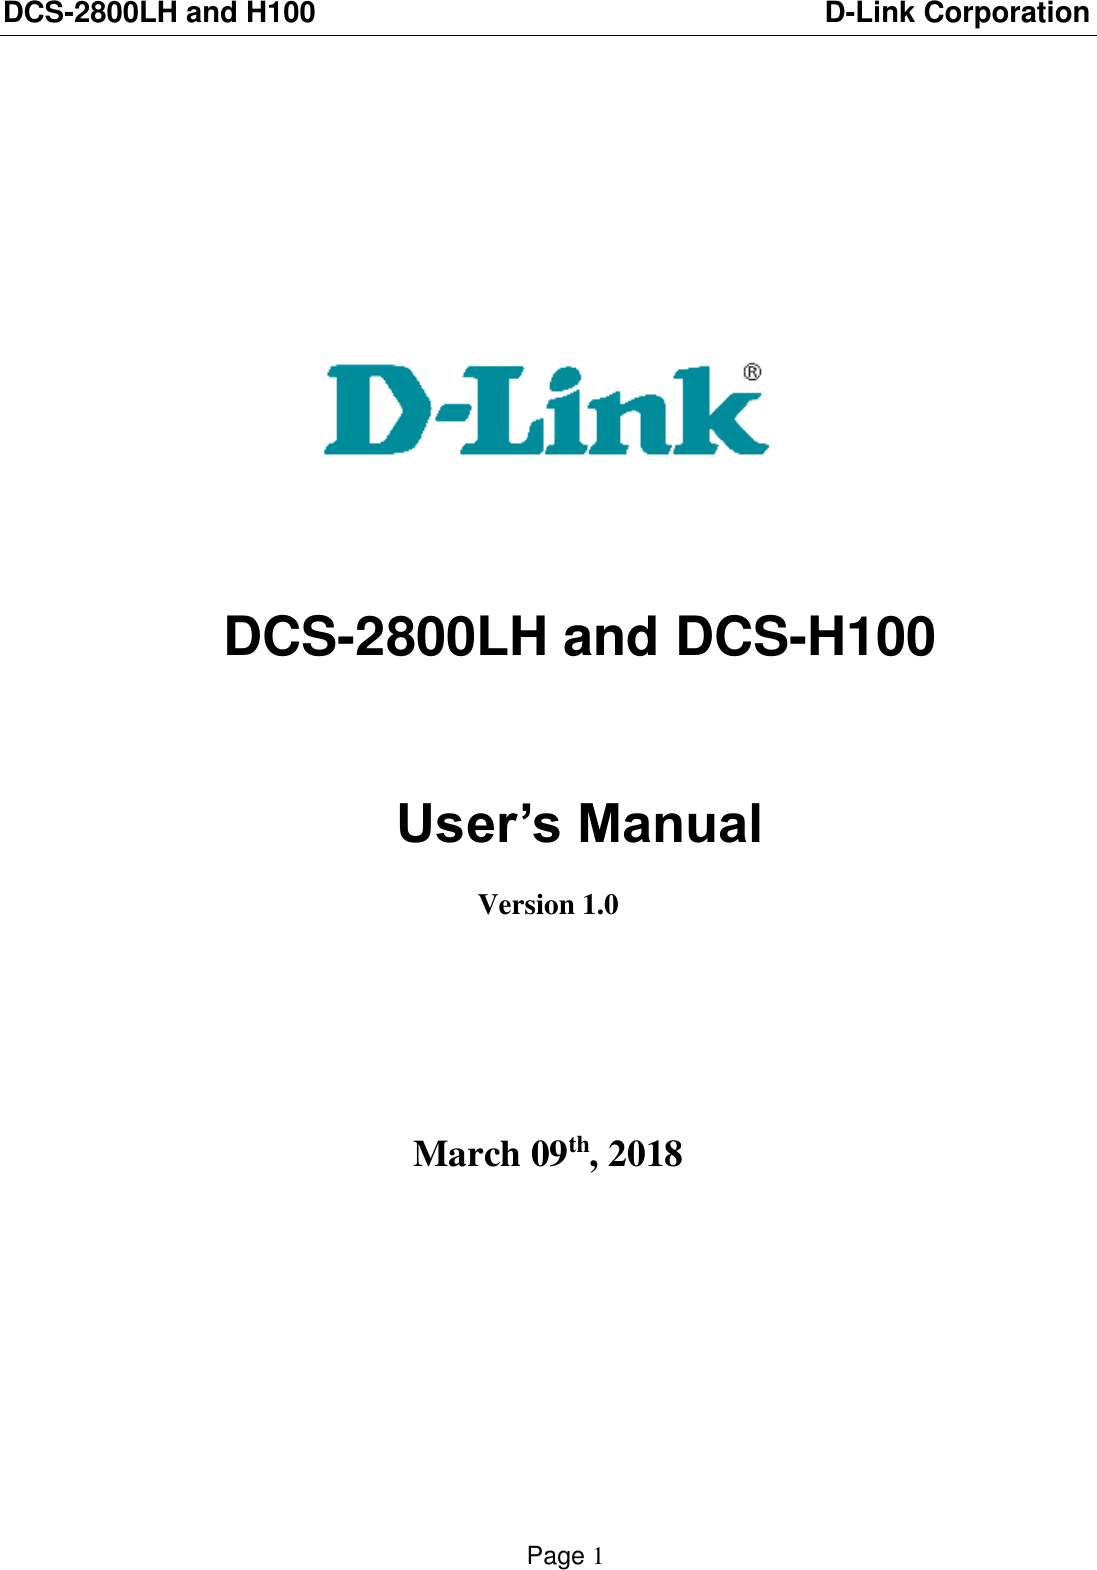 DCS-2800LH and H100                          D-Link Corporation    Page 1                  DCS-2800LH and DCS-H100    User’s Manual  Version 1.0     March 09th, 2018         